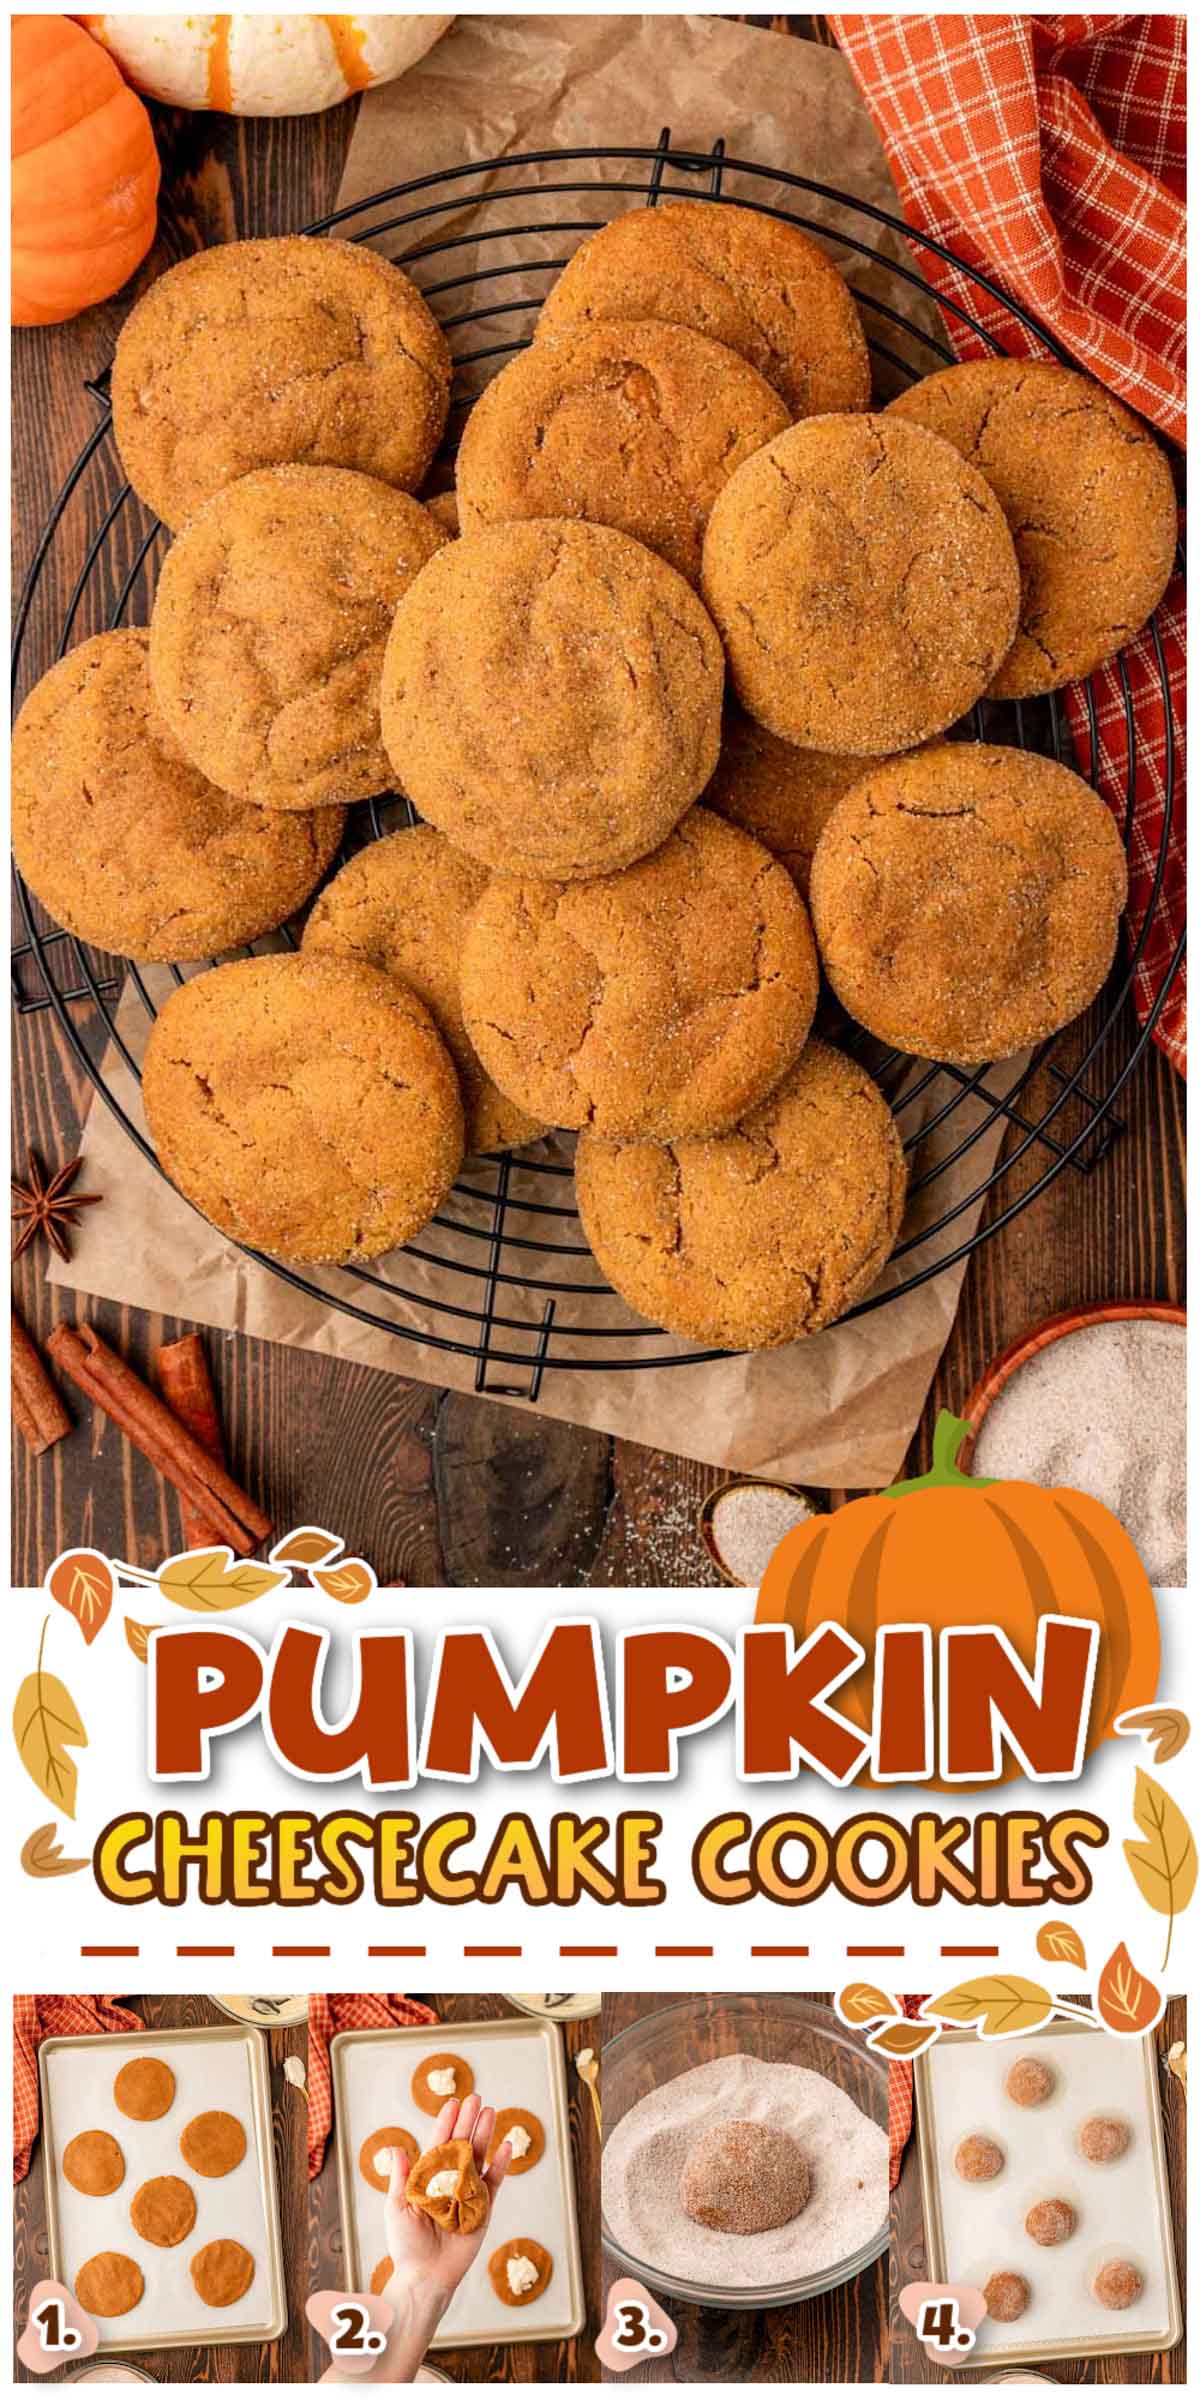 Fall into the season with these Pumpkin Cookies with Cream Cheese Filling! They're soft, sweetly spiced, and have a creamy cheesecake-like center that's totally drool-worthy and impressive without being hard to make! Zero chilling required! via @sugarandsoulco